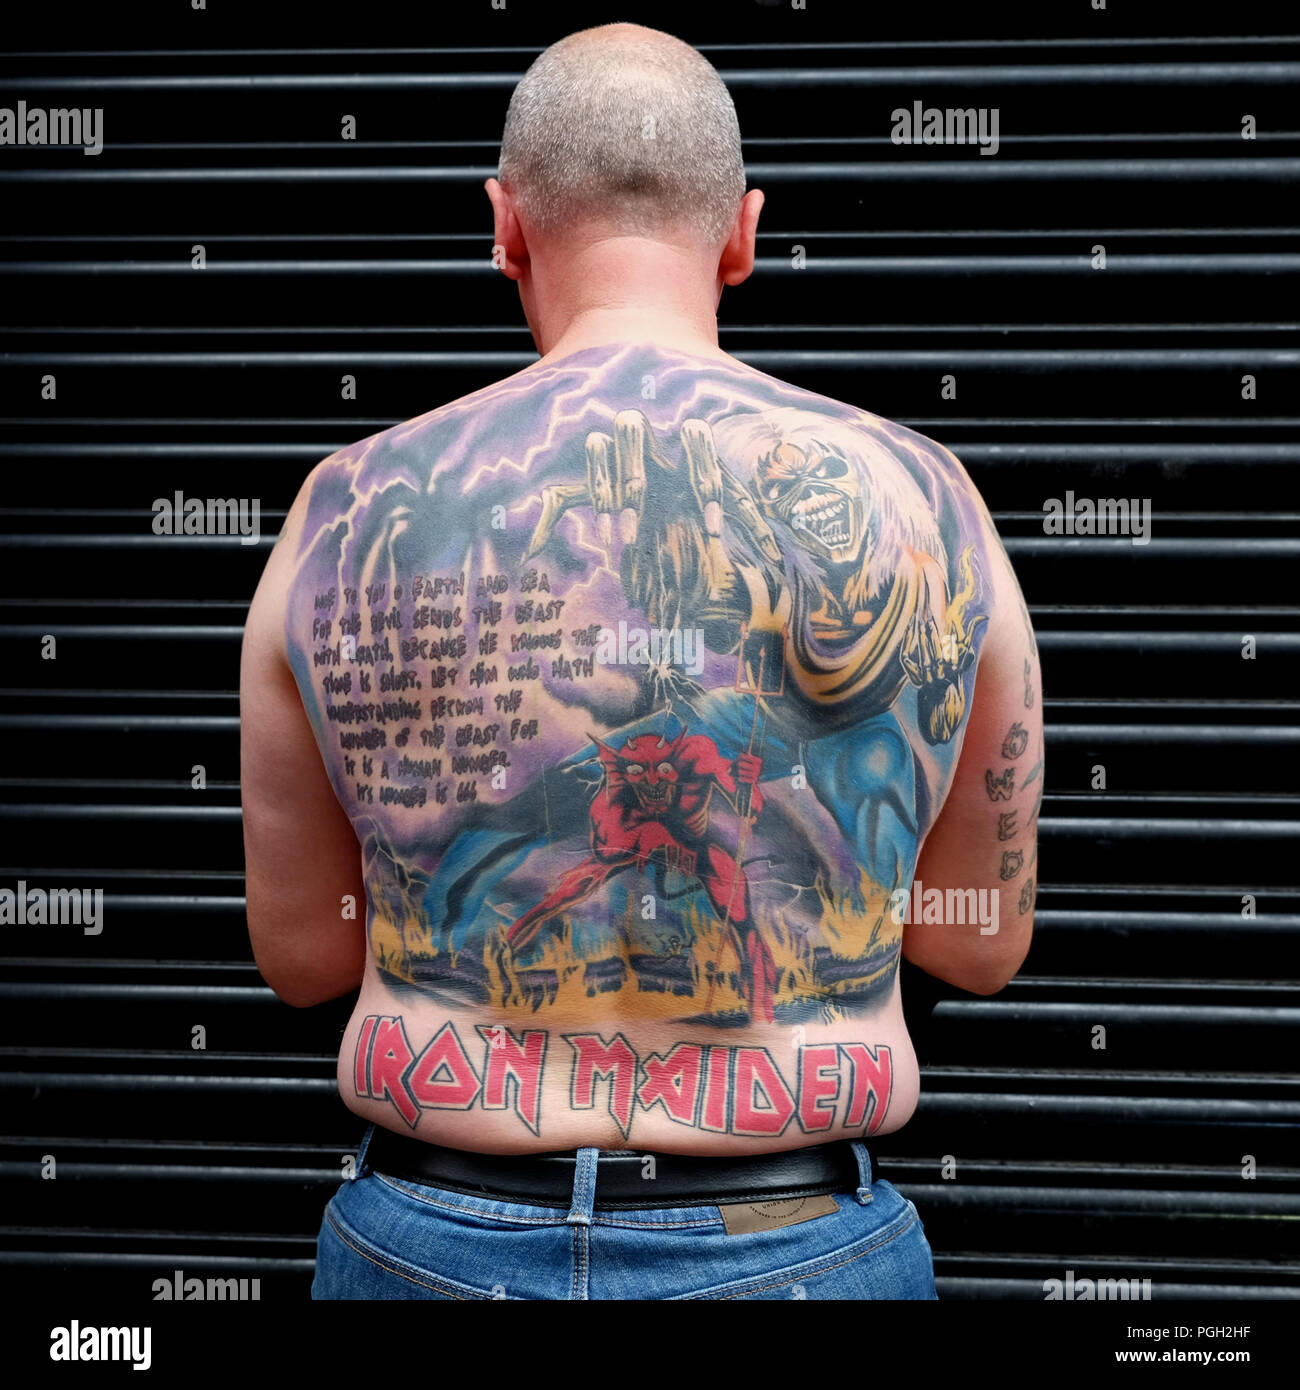 The surprising science of tattoos from medicinal benefits to how they  hijack the immune system  South China Morning Post